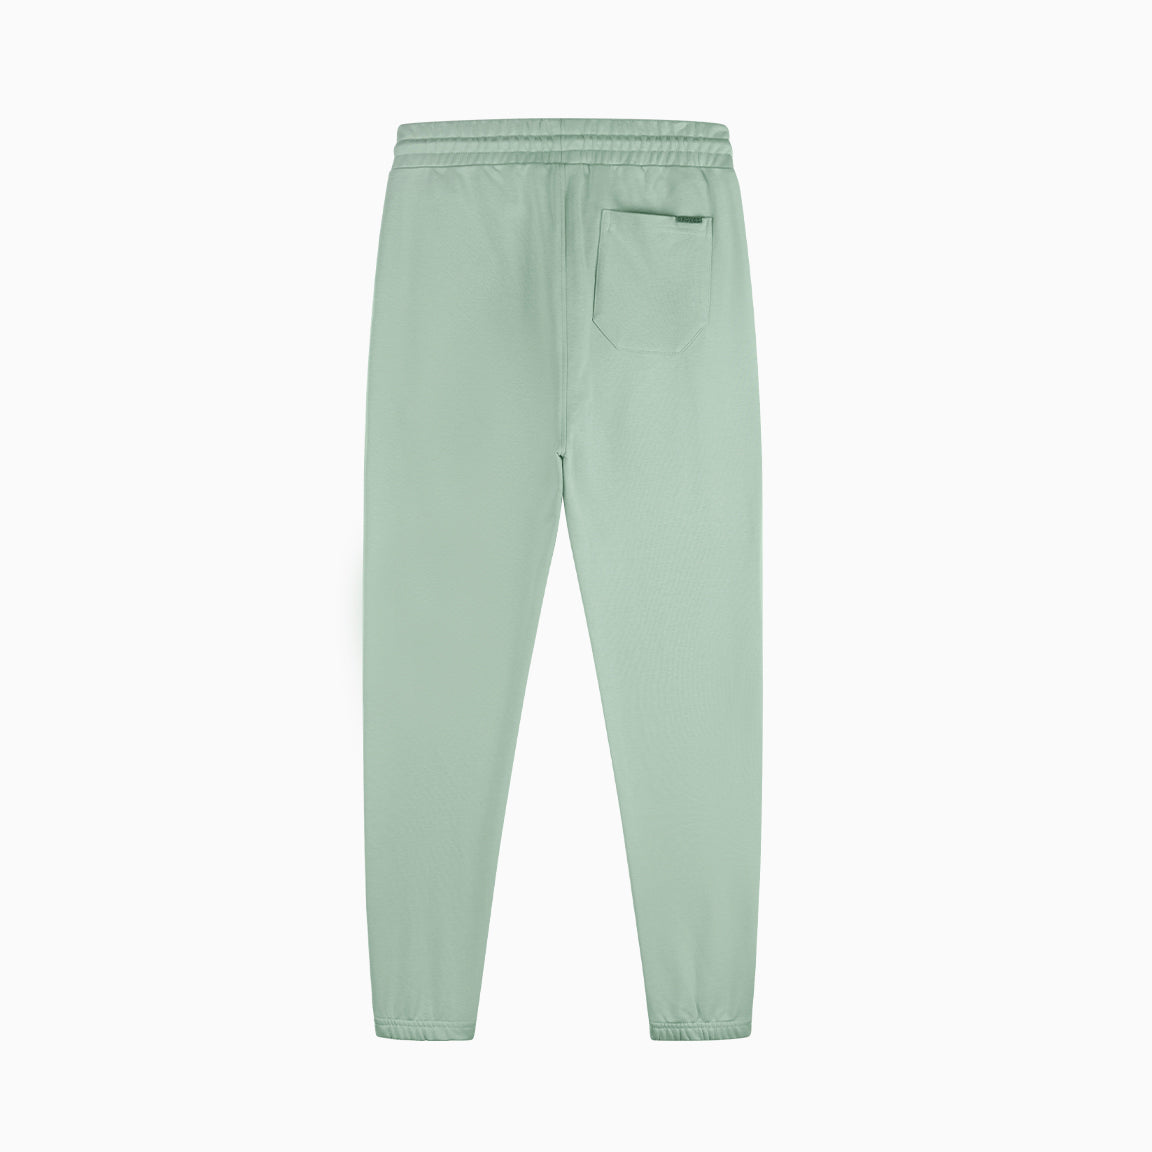 CROYEZ ABSTRACT TRACKPANTS - SILT GREEN